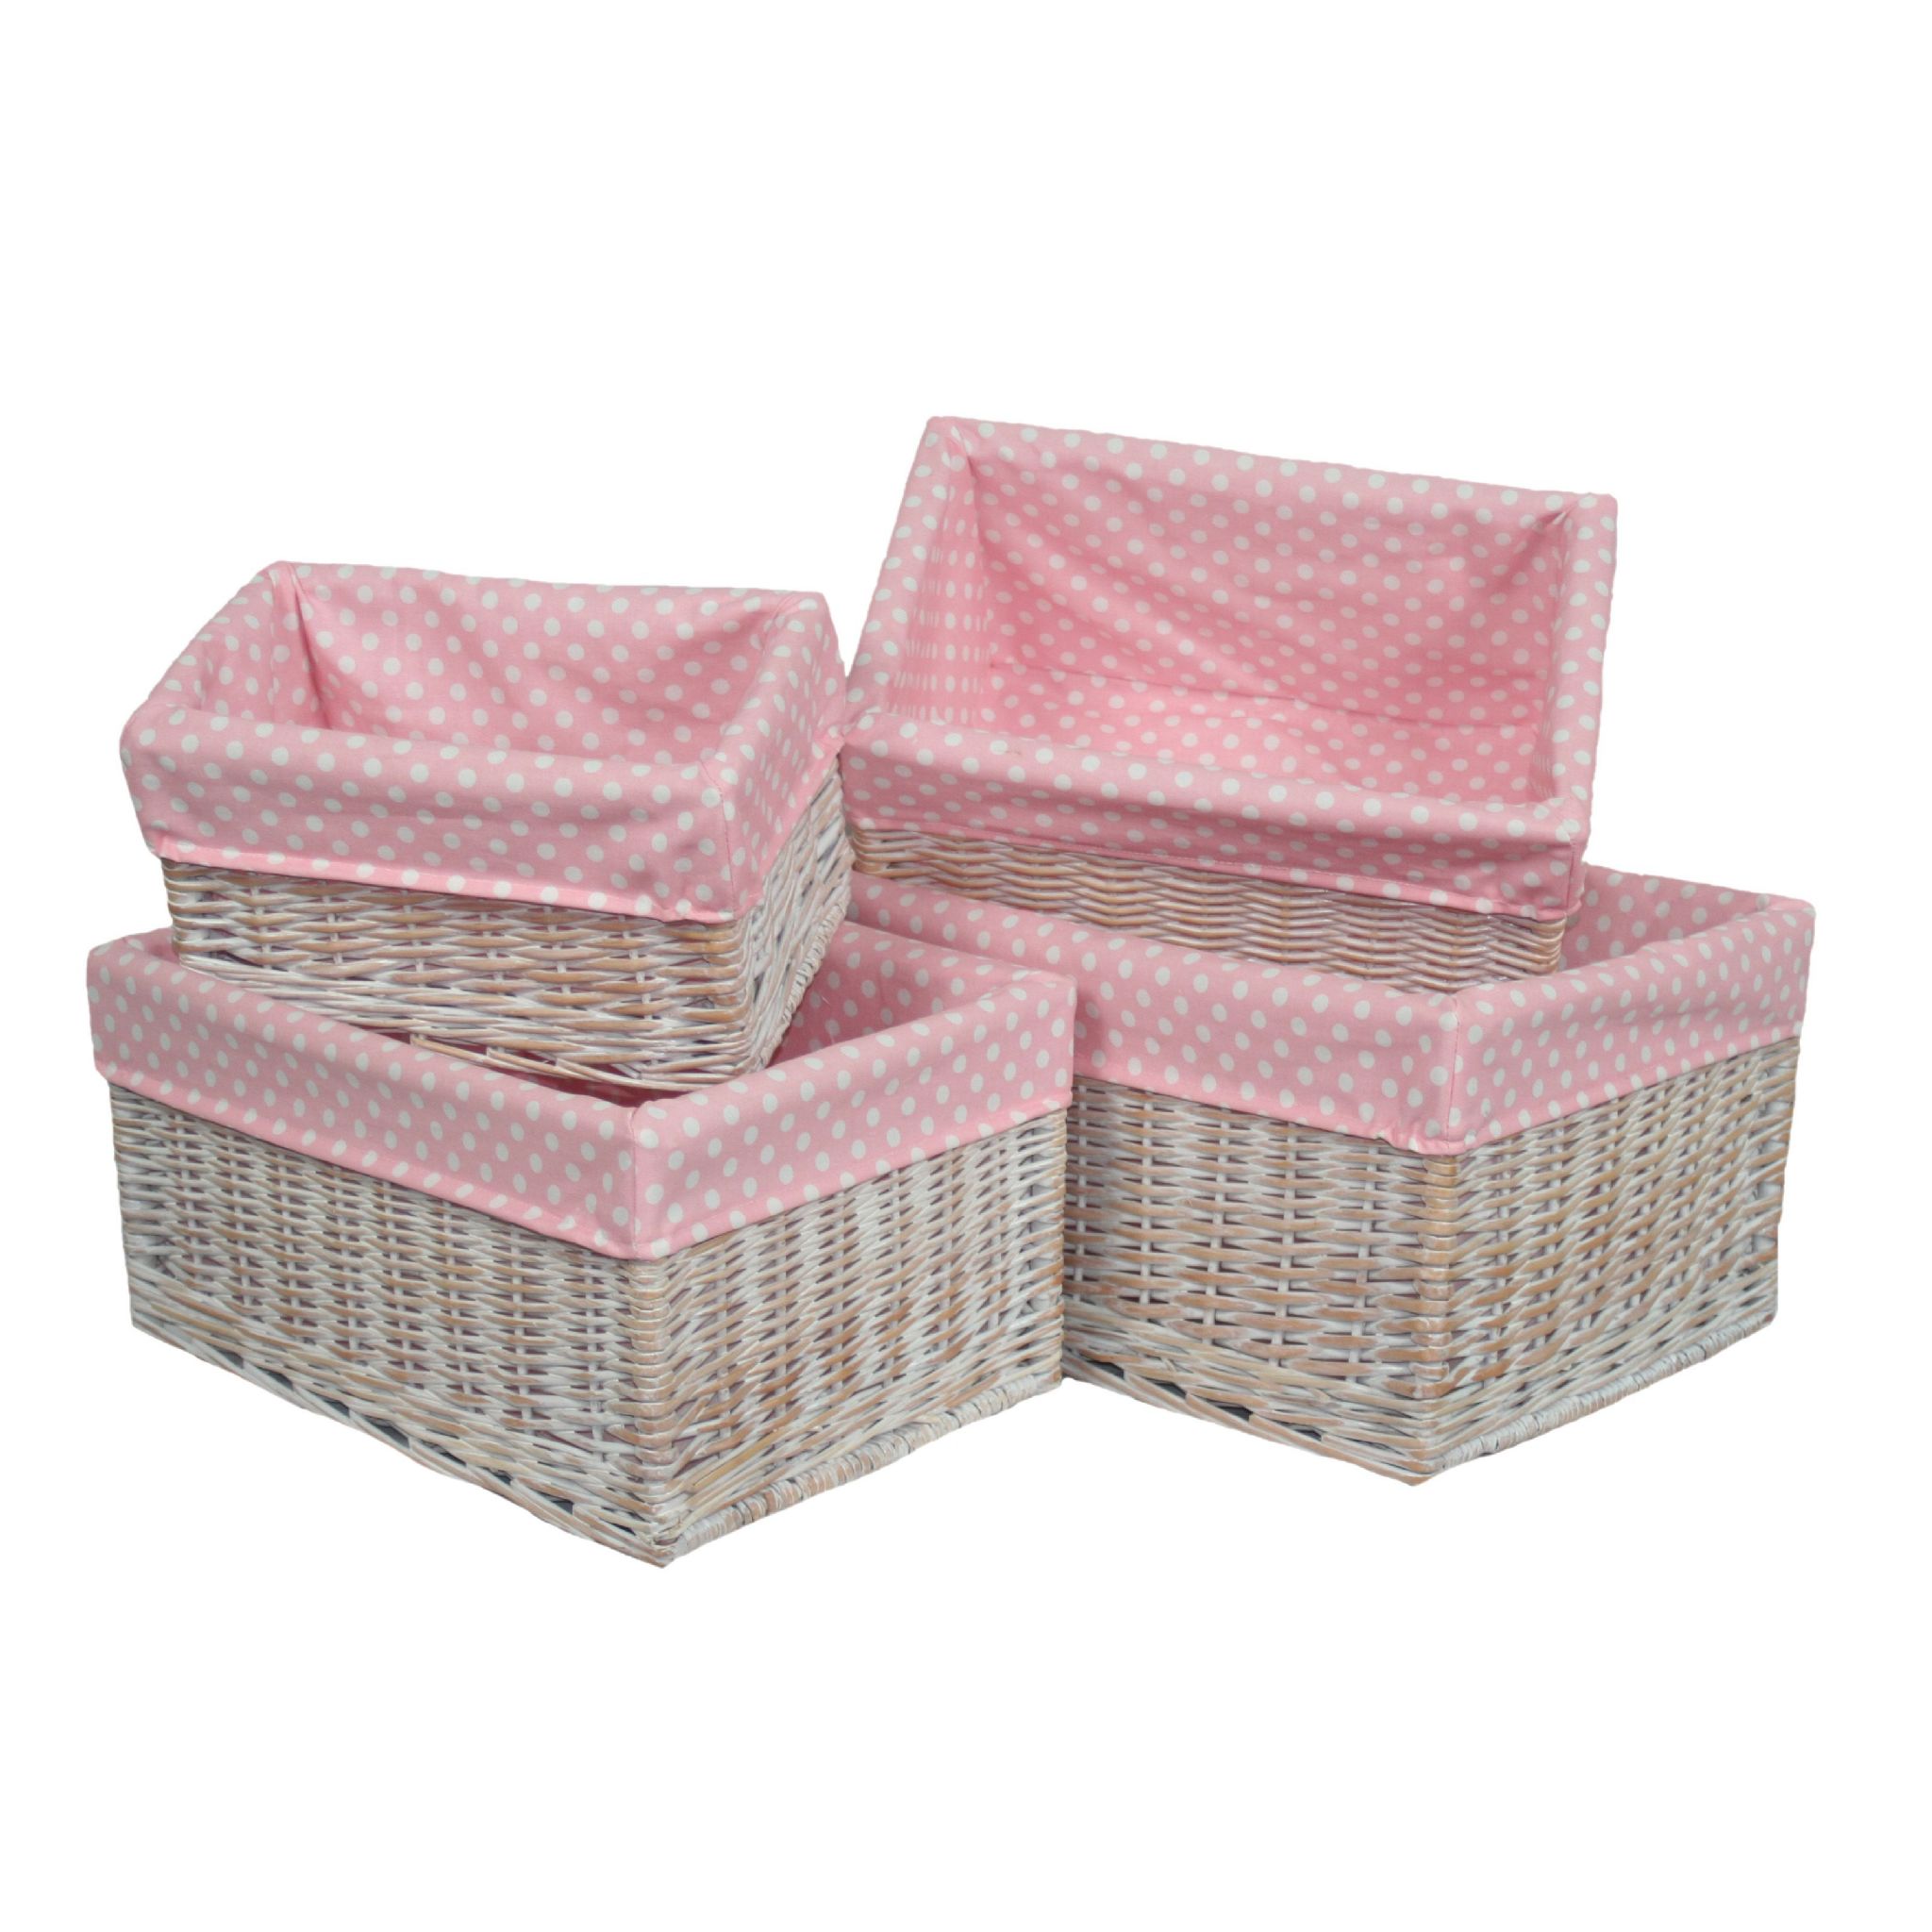 New-England-4-Pink-Lined-White-Wicker-Baskets-13747-p.jpg